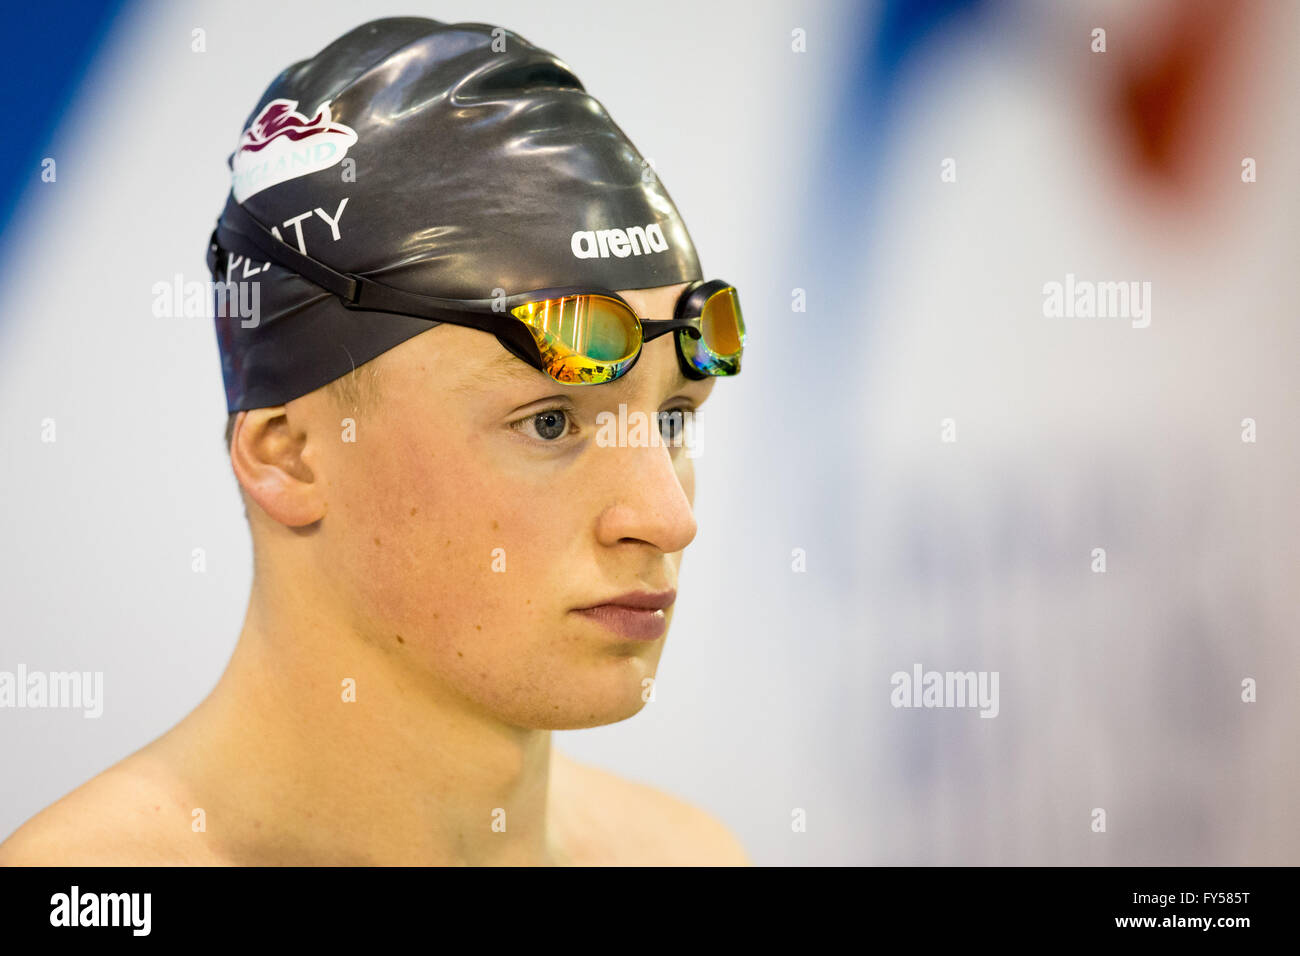 GLASGOW, UK: April, 12, 2016 Adam Peaty of Great Britain prior to the start of the Men's 100m Breaststroke Final Stock Photo